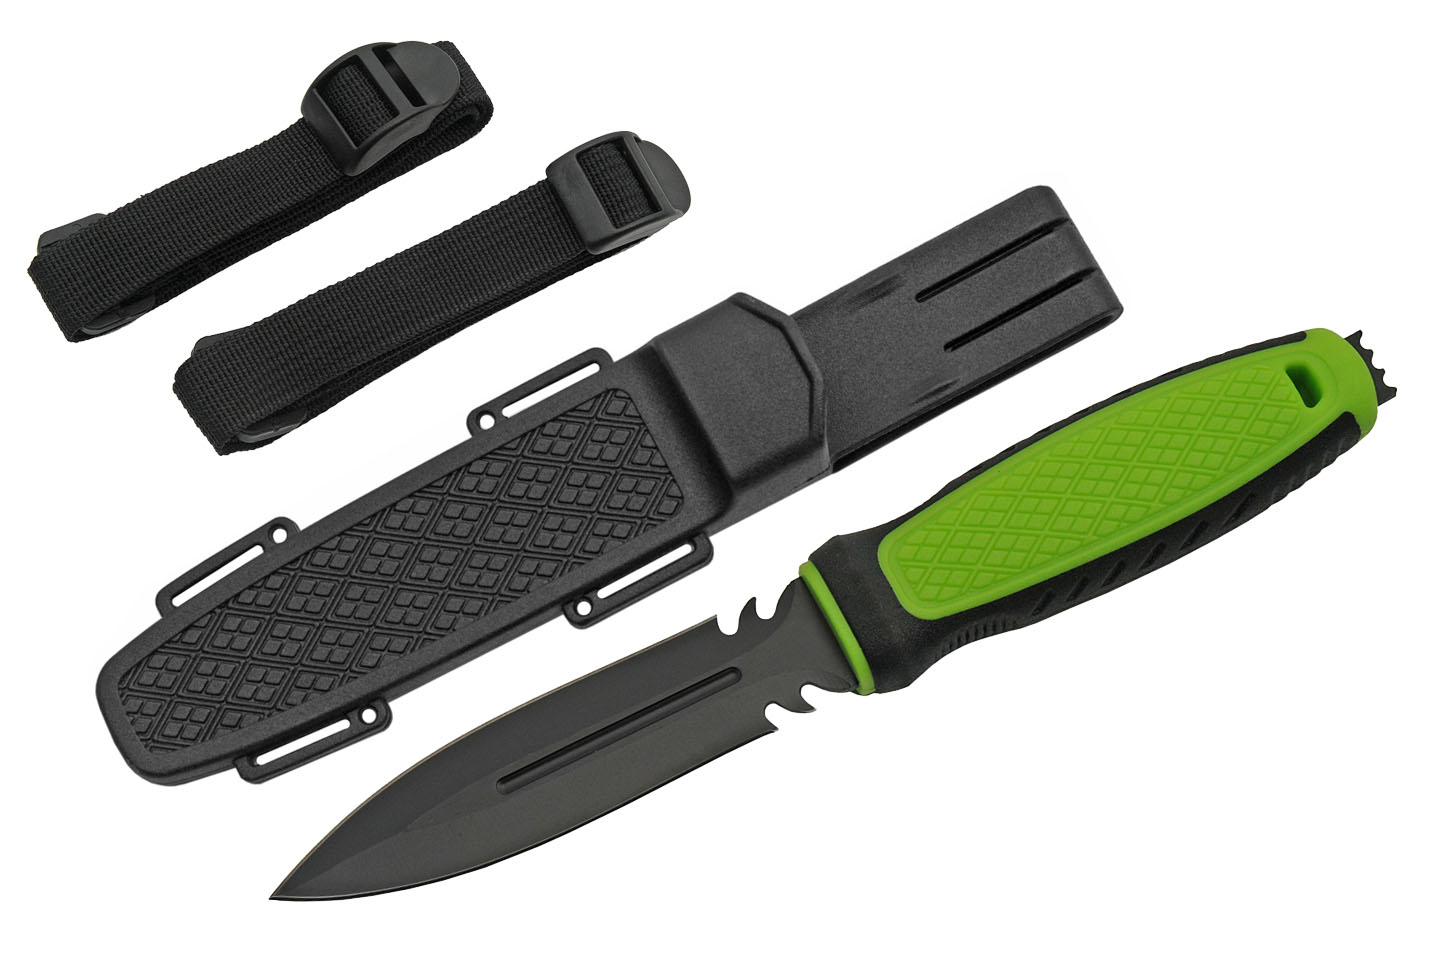 Dive Knife 9.25in. Overall Black Blade Double Edge Green + Sheath, Leg Straps